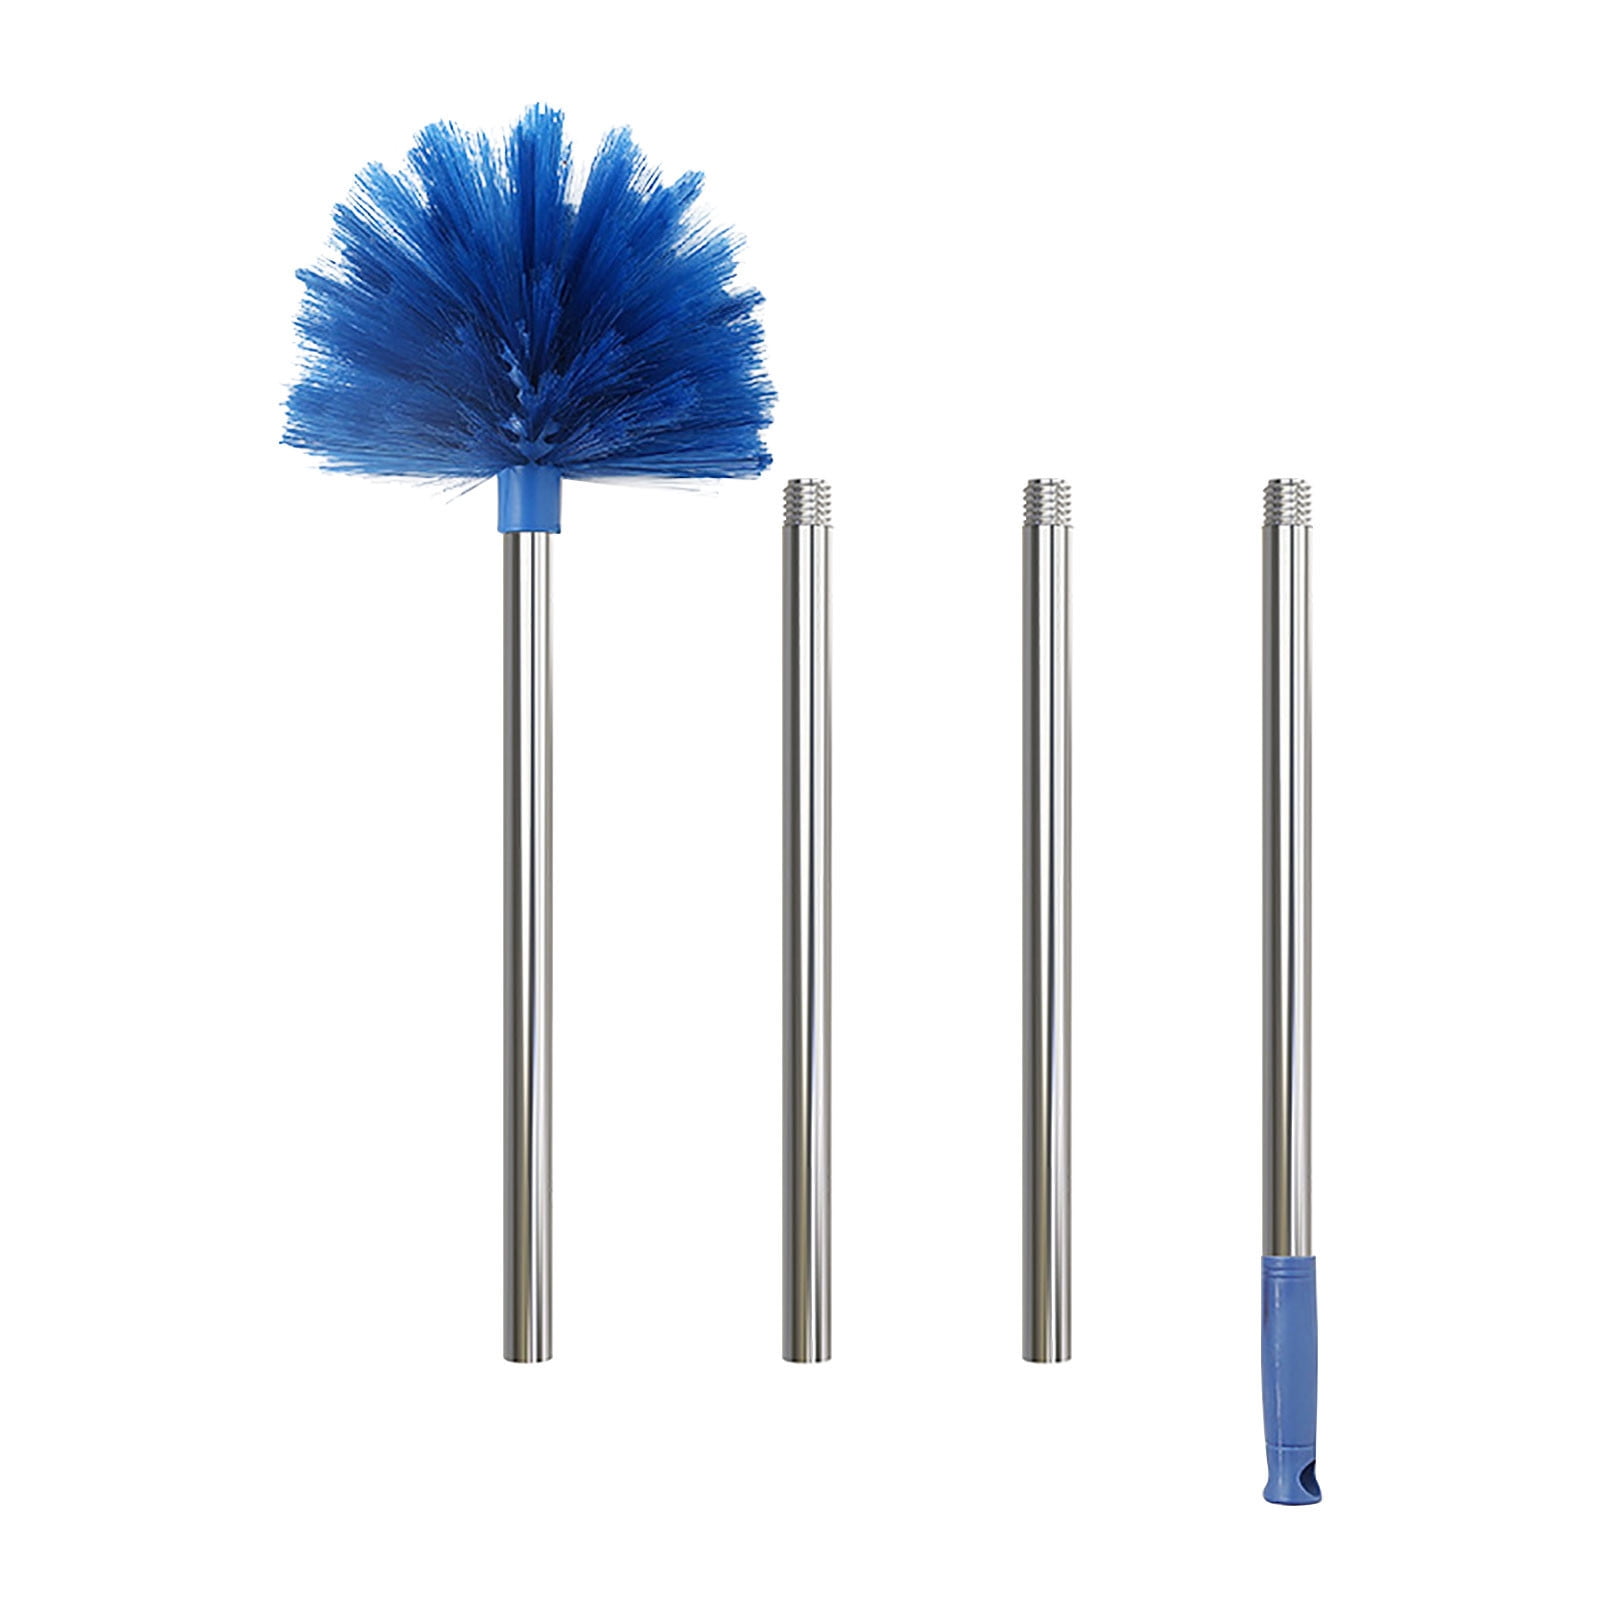 Ceiling Fan Duster with Extension Pole, Cobweb & Corner Brush